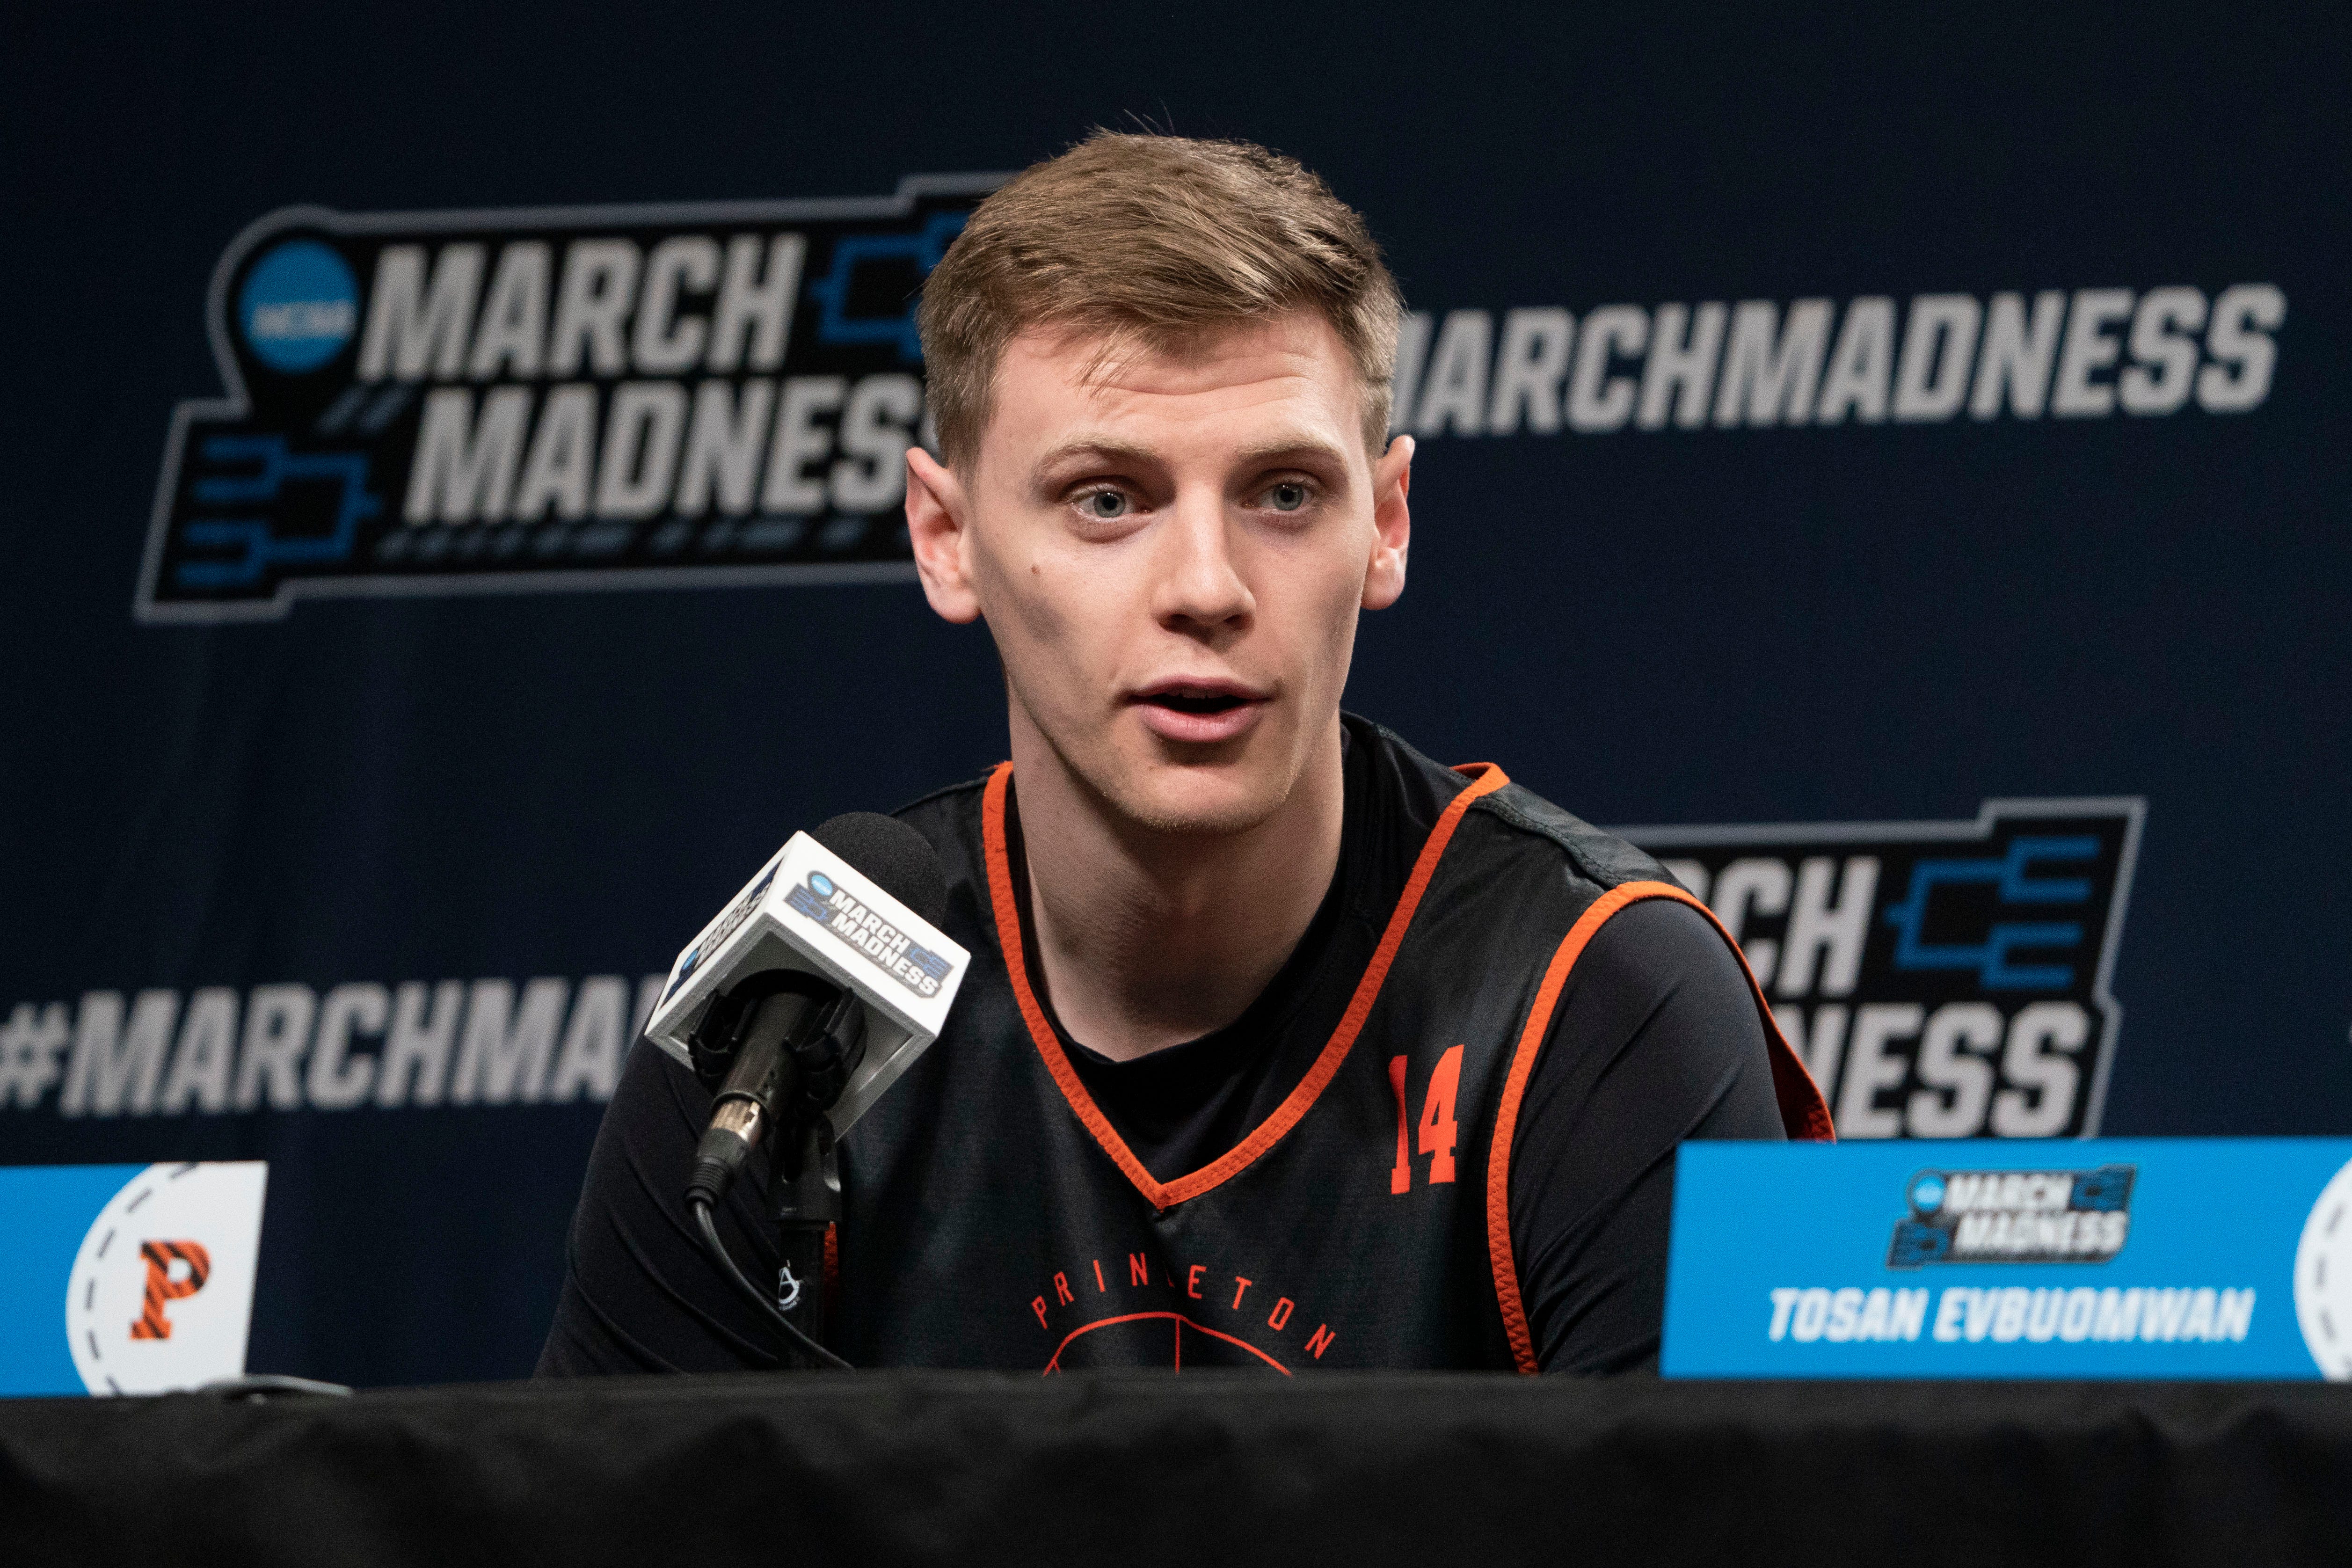 Mar 15, 2023; Sacramento, CA, USA; Princeton Tigers guard Matt Allocco (14) addresses the media in a press conference during practice day at Golden 1 Center. Mandatory Credit: Kyle Terada-USA TODAY Sports